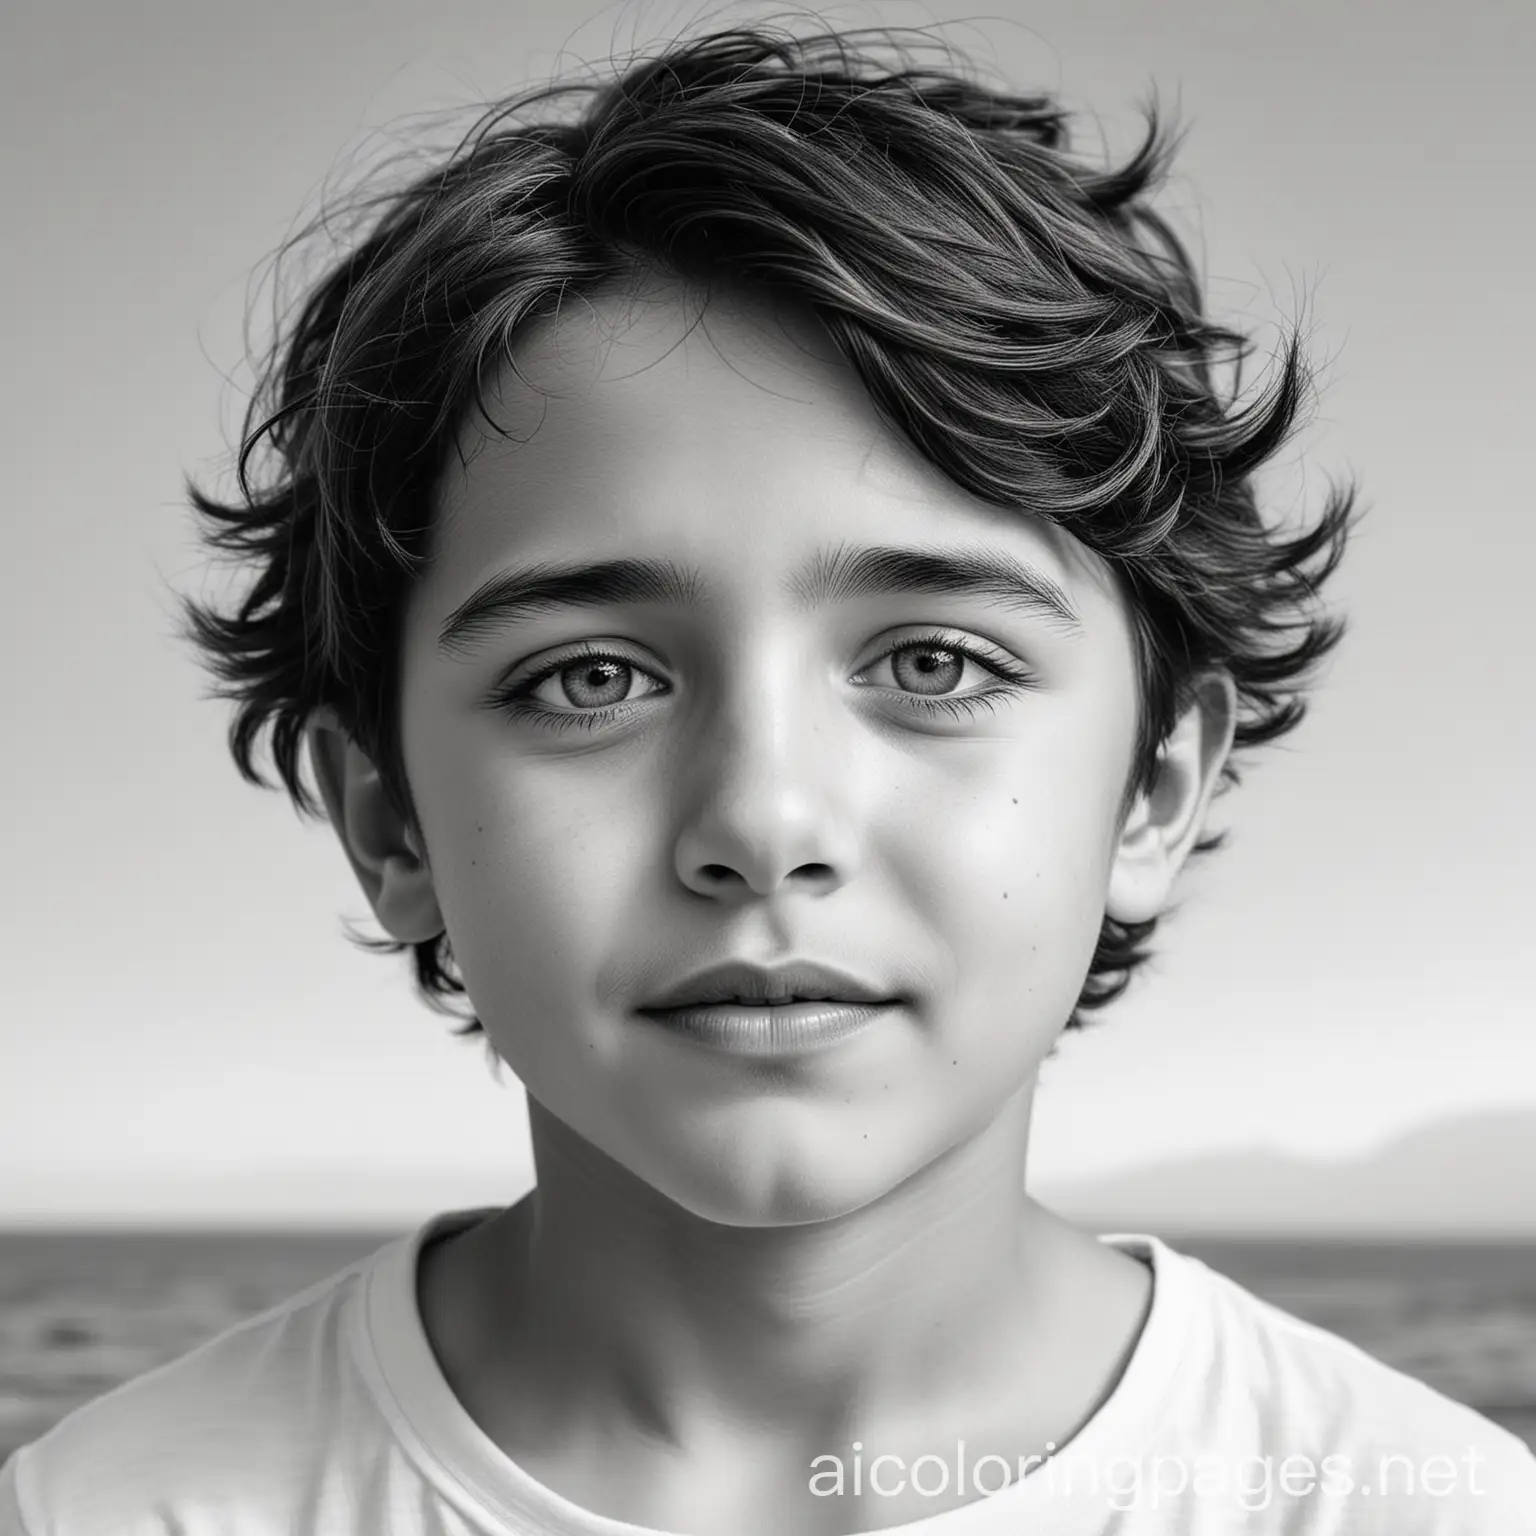 Nikos was ten years old, with eyes as bright as the Aegean sky and a heart that danced to the rhythm of adventure., Coloring Page, black and white, line art, white background, Simplicity, Ample White Space. The background of the coloring page is plain white to make it easy for young children to color within the lines. The outlines of all the subjects are easy to distinguish, making it simple for kids to color without too much difficulty